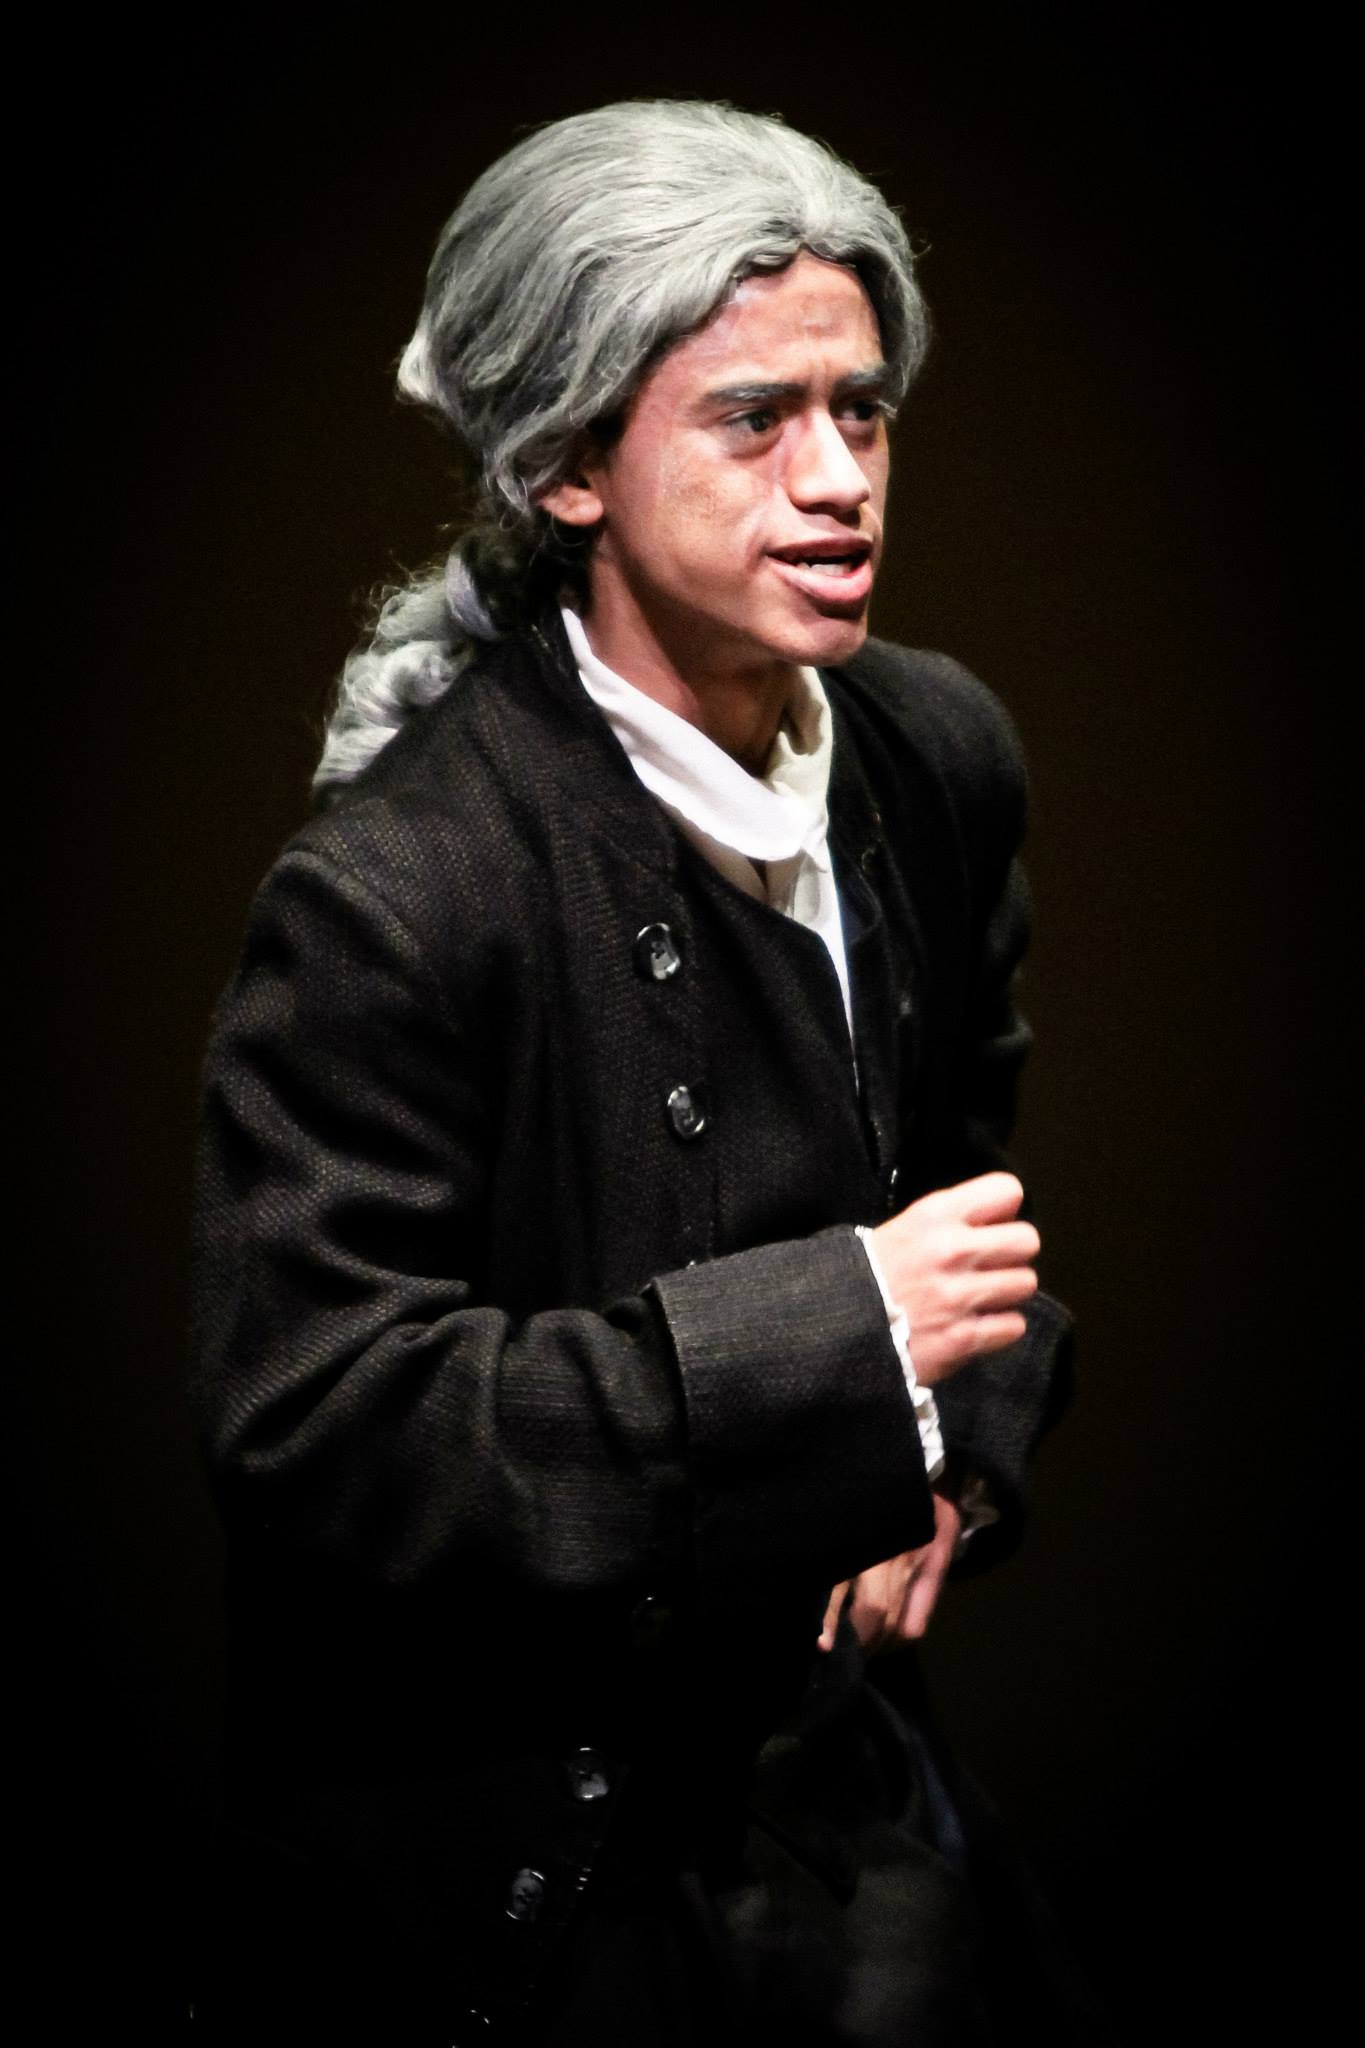 Antonio Abarca as Giles Corey for the RRHS theatre production of the Crucible. (2013)